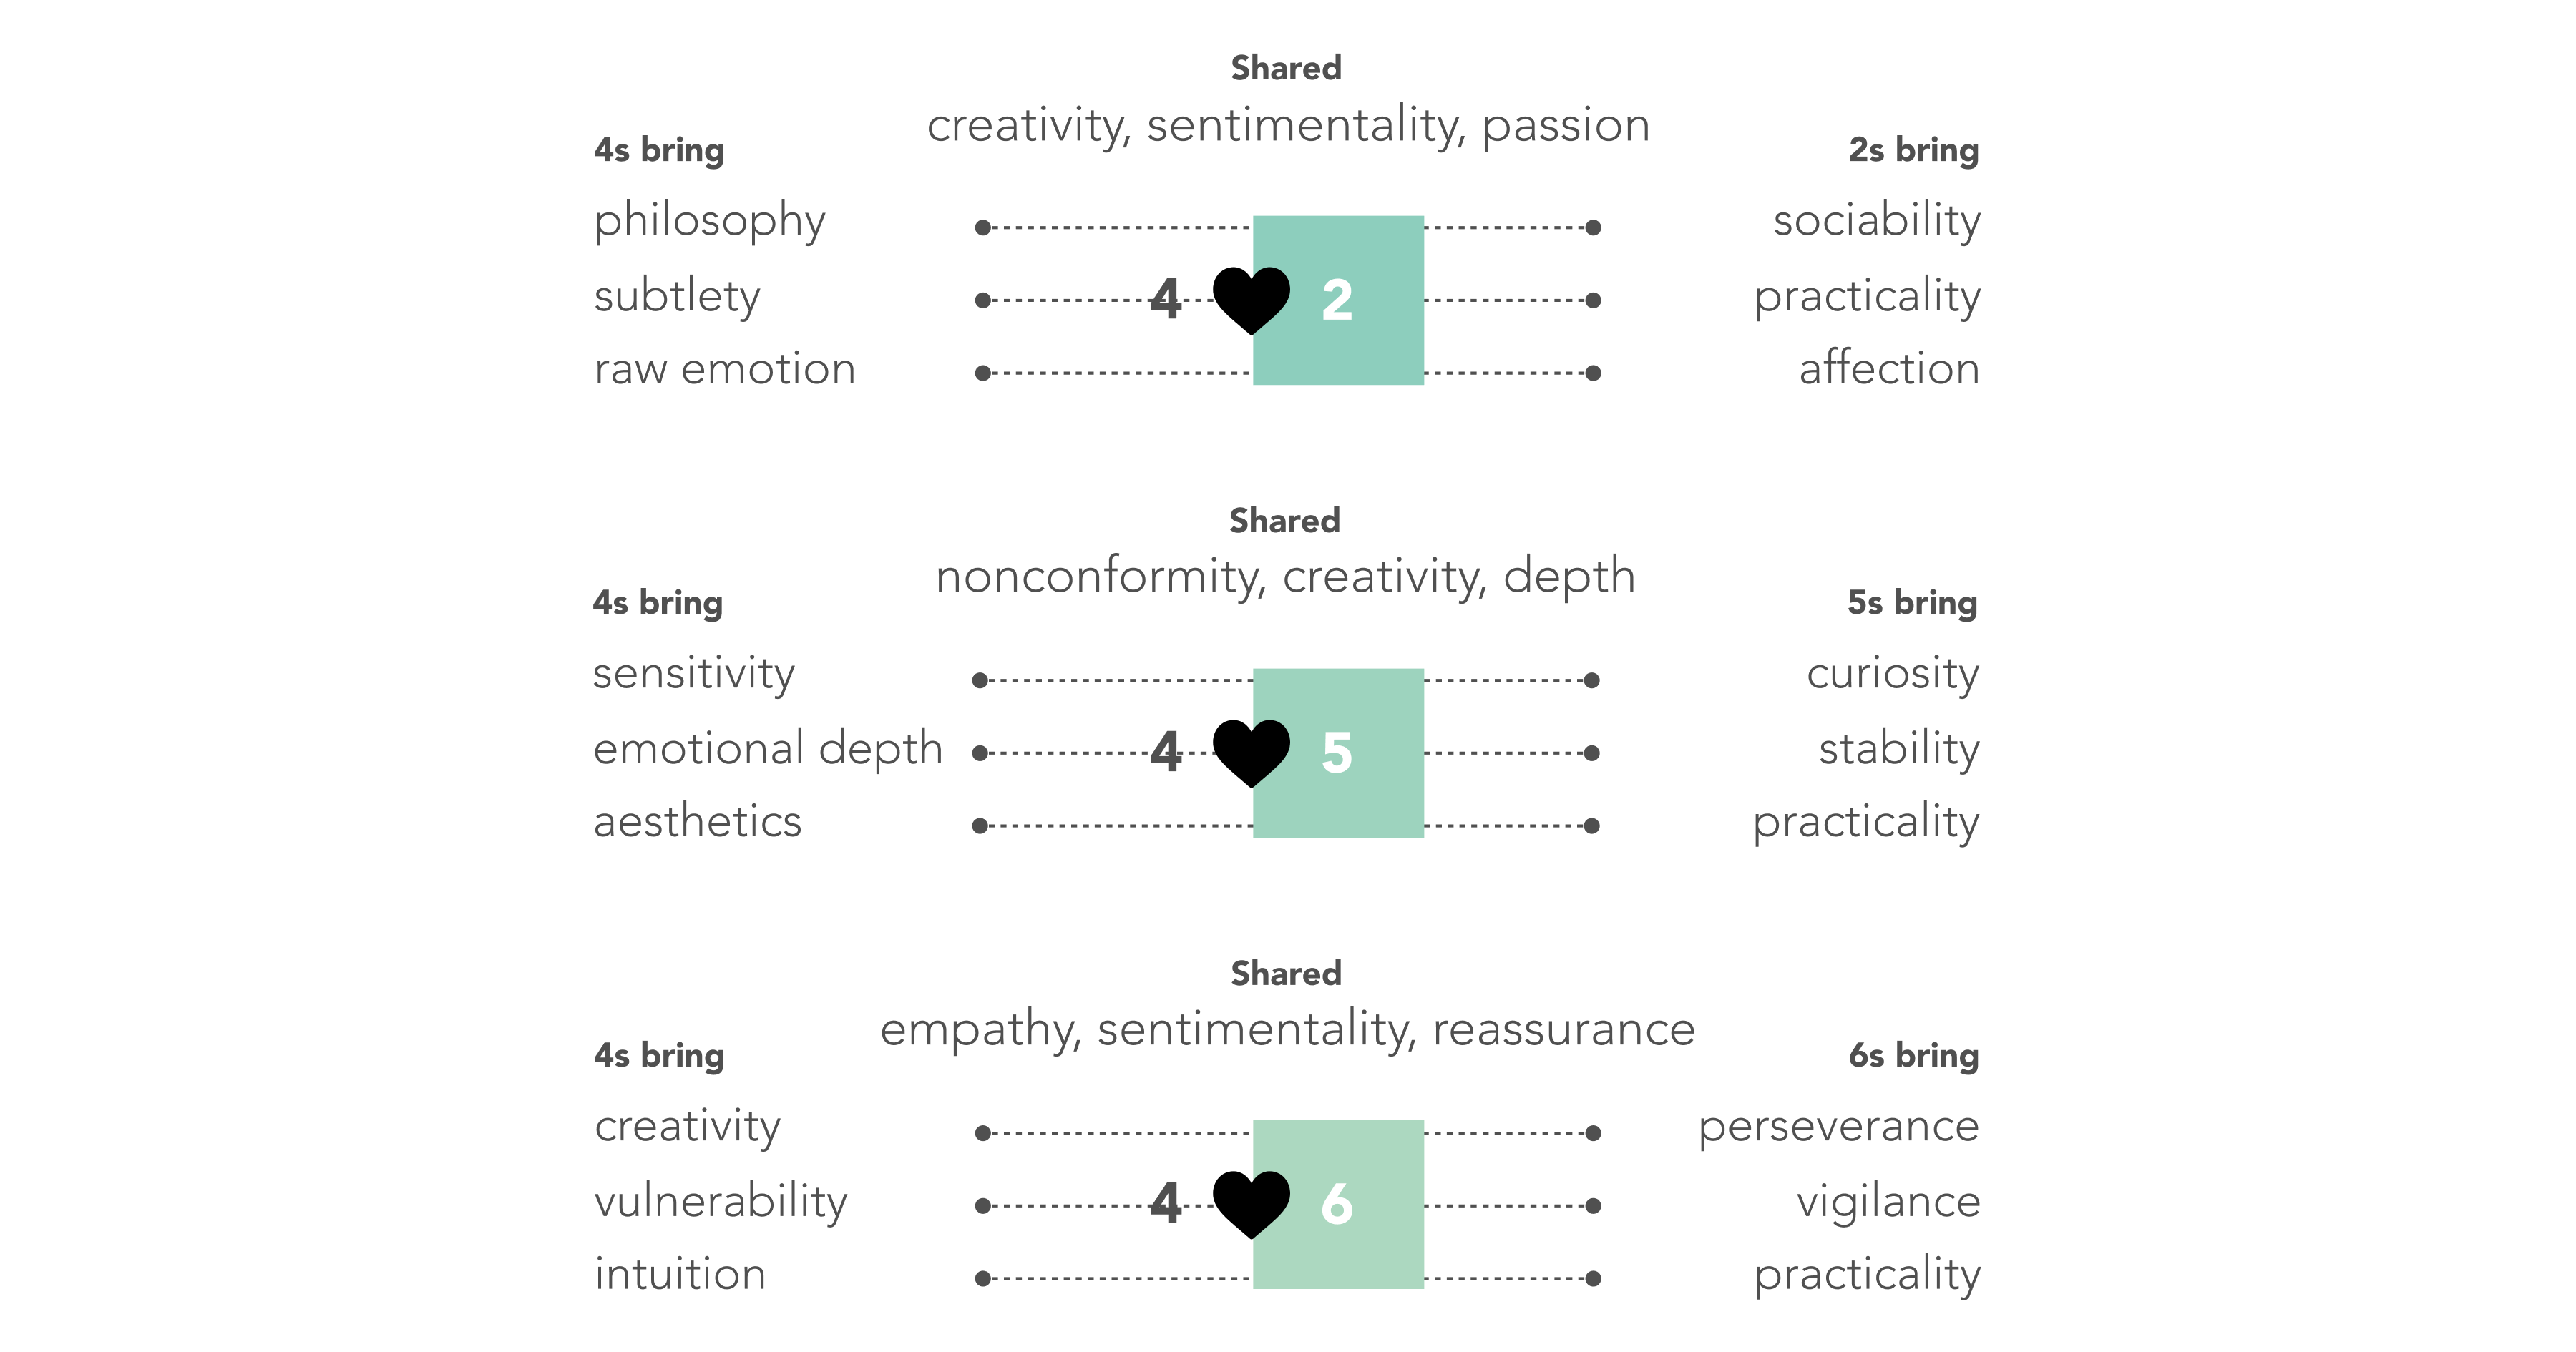 4s and 2s share creativity, sentimentality, passion. 4s bring philosophy, subtlety, raw emotion, while 2s bring sociability, practicality, affection. 4s and 5s share nonconformity, creativity, depth. 4s bring sensitivity, emotional depth, aesthetics, while 5s bring curiosity, stability, practicality. 4s and 6s share empathy, sentimentality, reassurance. 4s bring creativity, vulnerability, intuition, while 6s bring perseverance, vigilance, practicality.